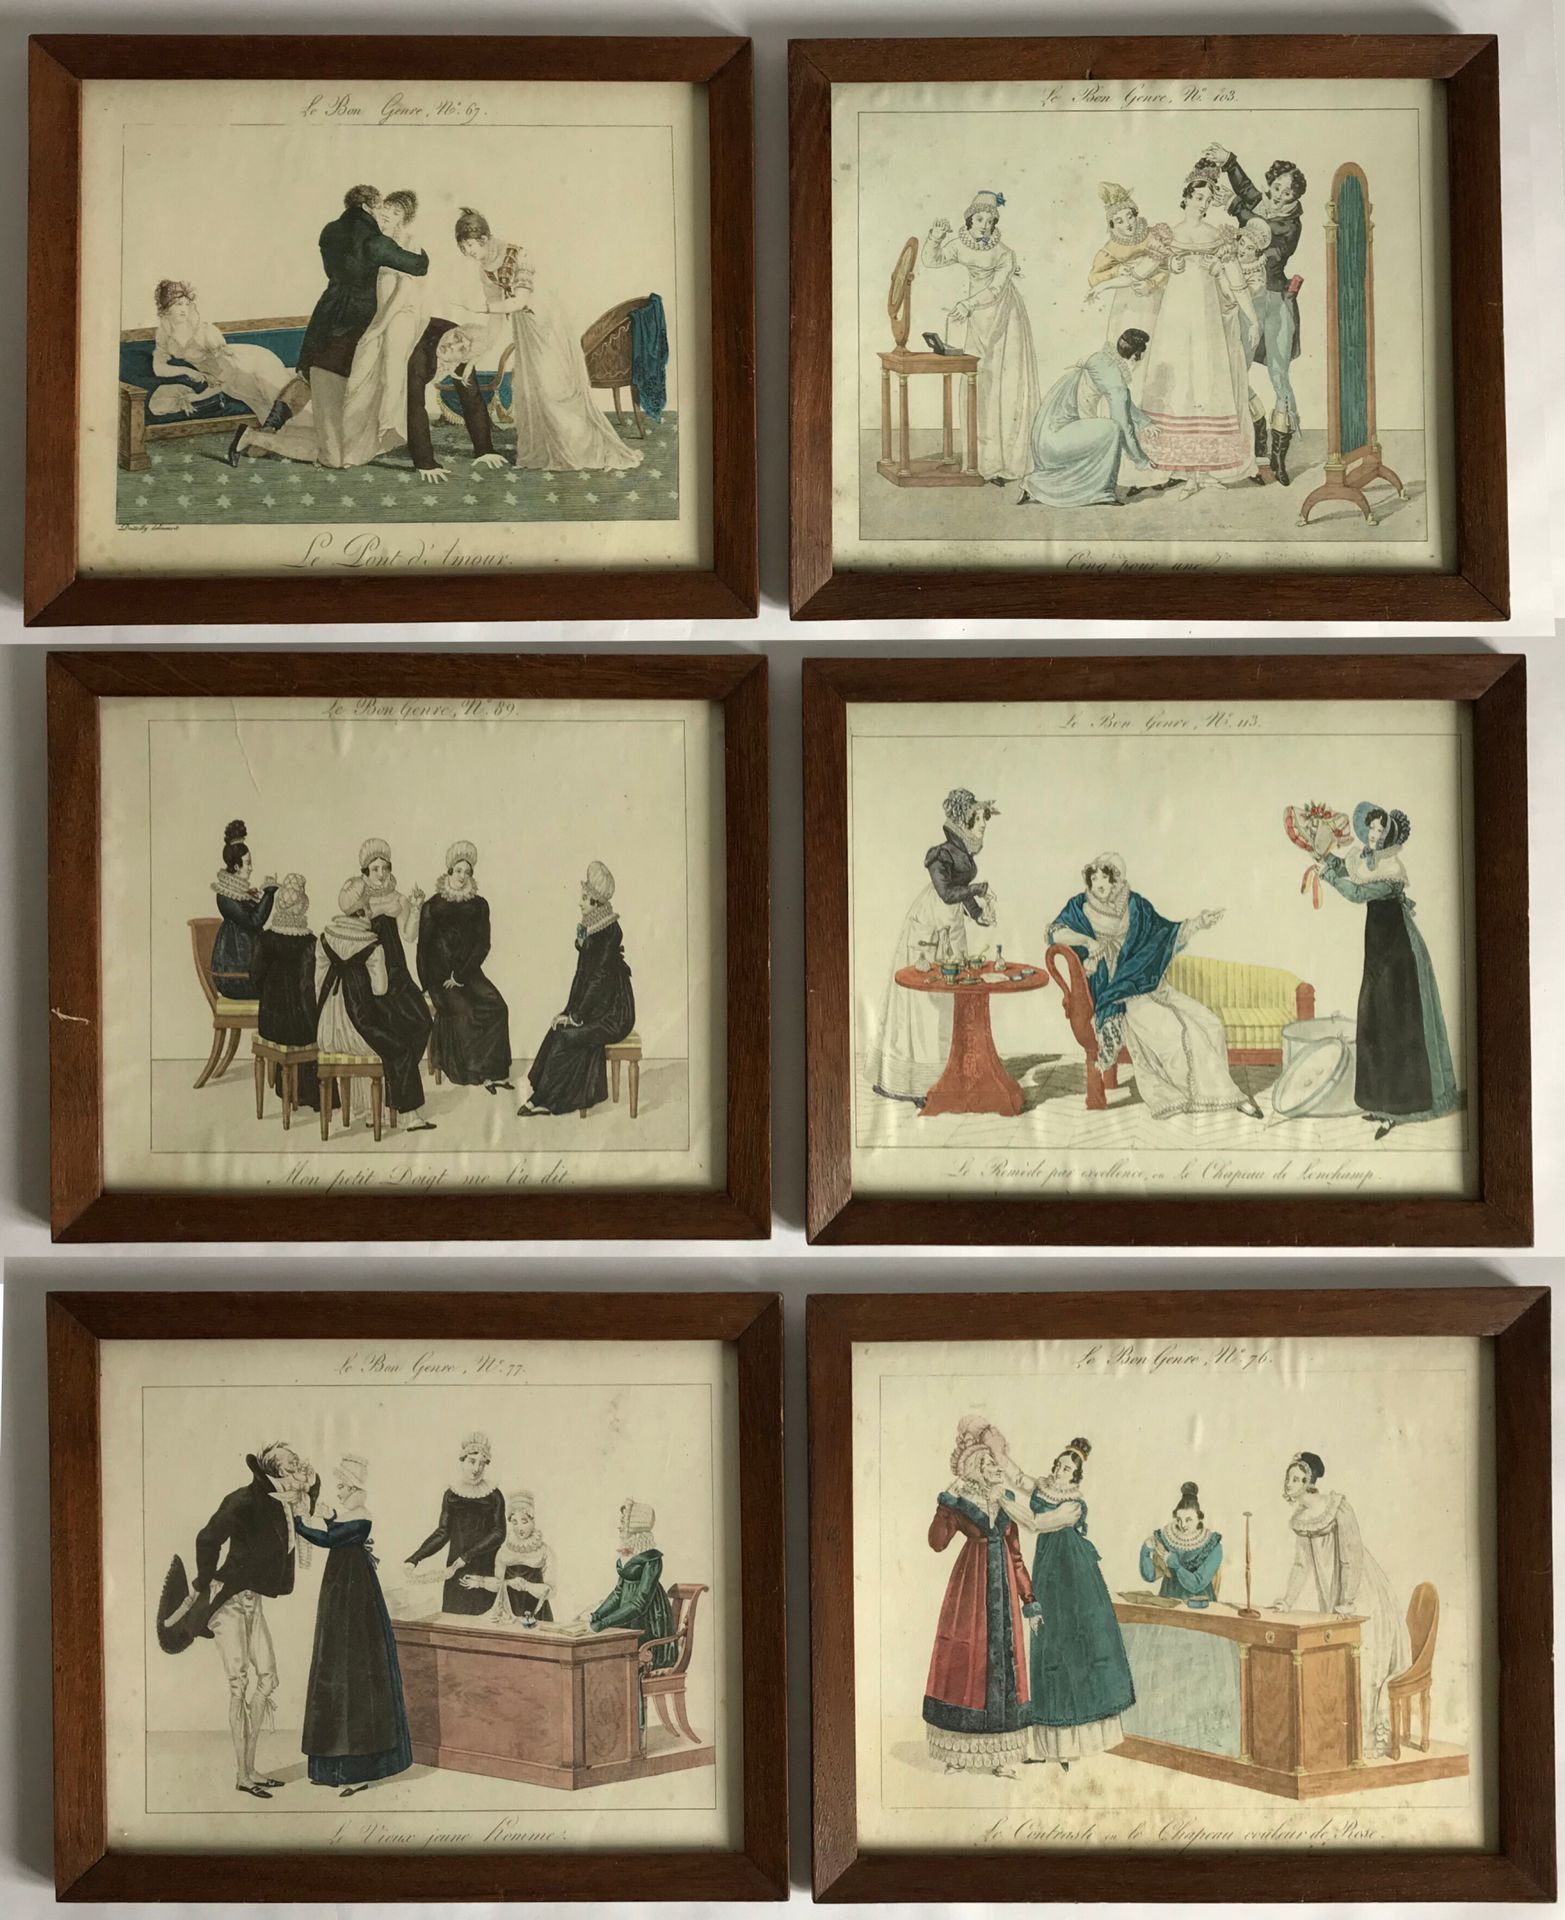 Null After DUTAILLY

Set of six framed reproductions from the series: Le Bon Gen&hellip;